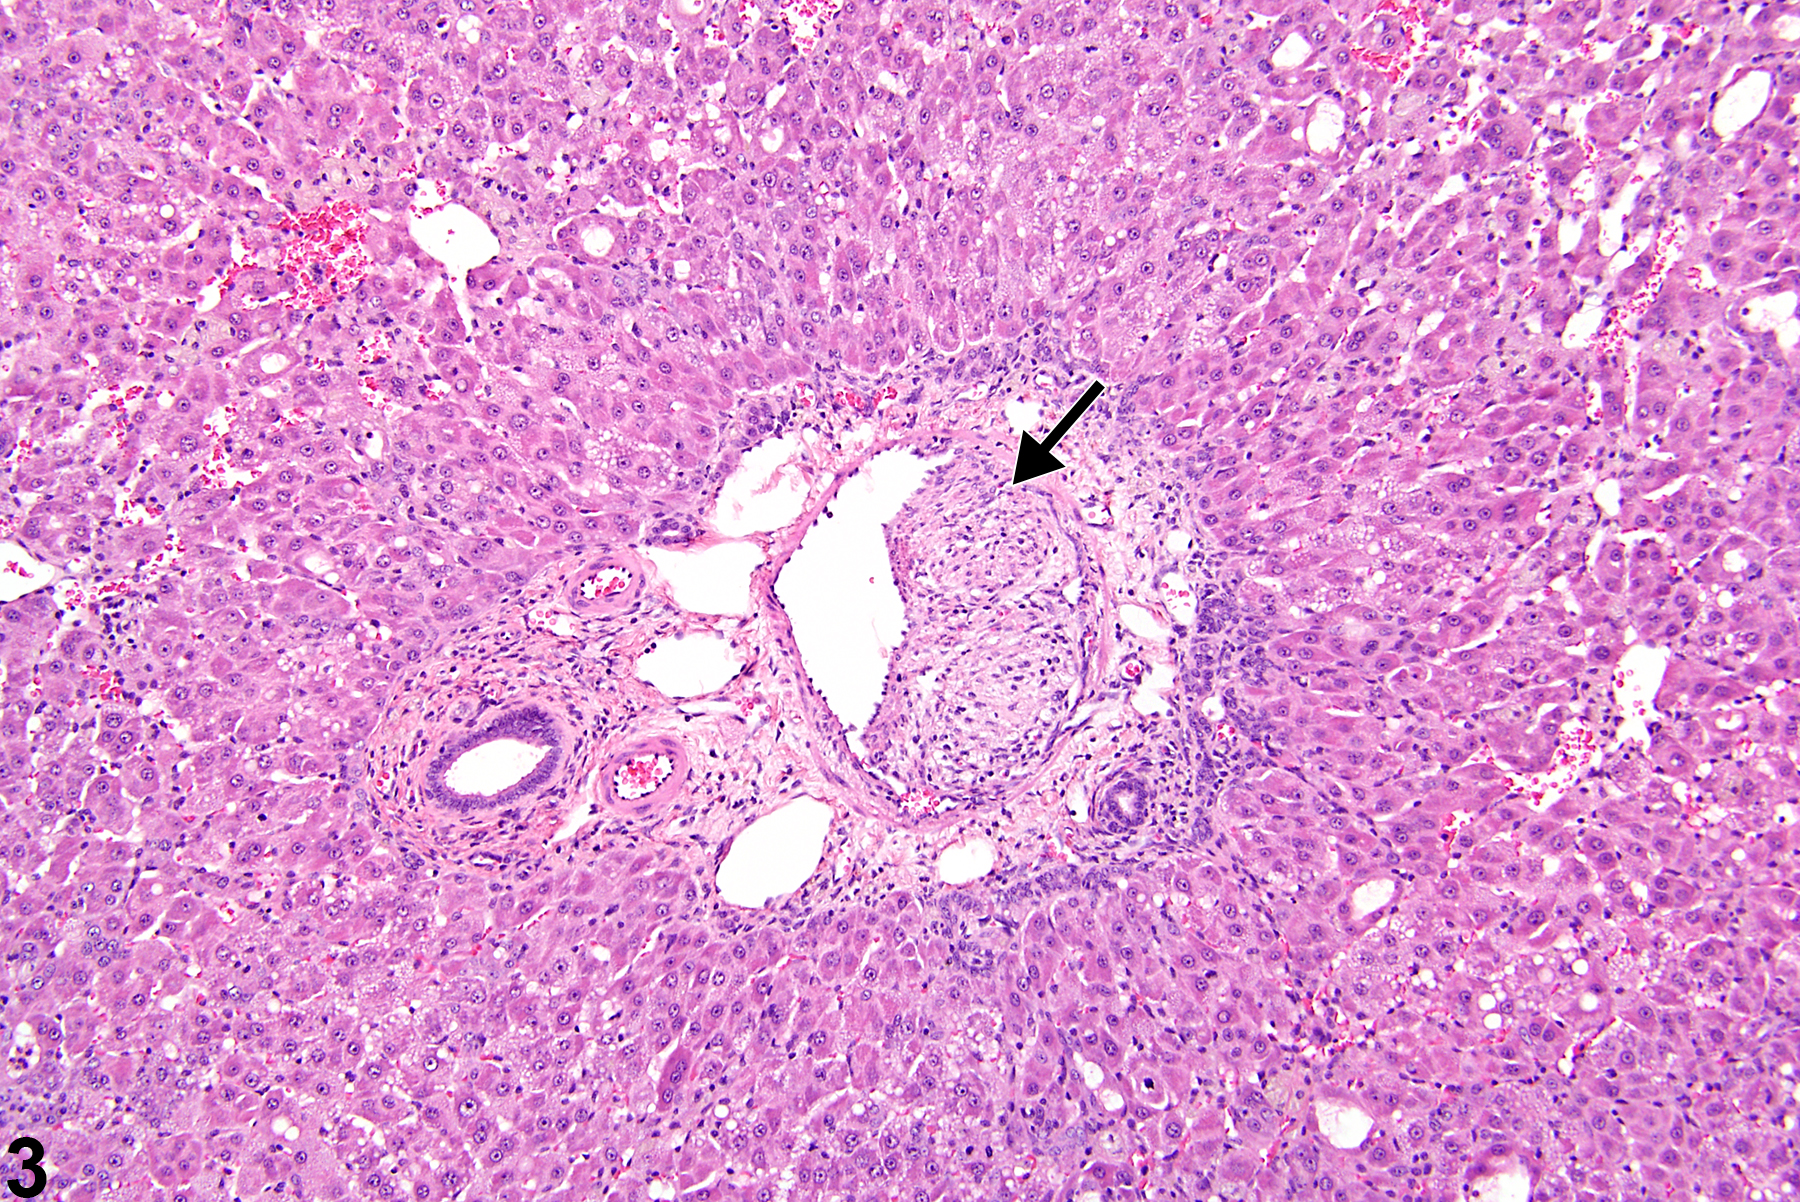 Image of proliferation, intimal in the liver, artery from a female F344/N rat in a subchronic study